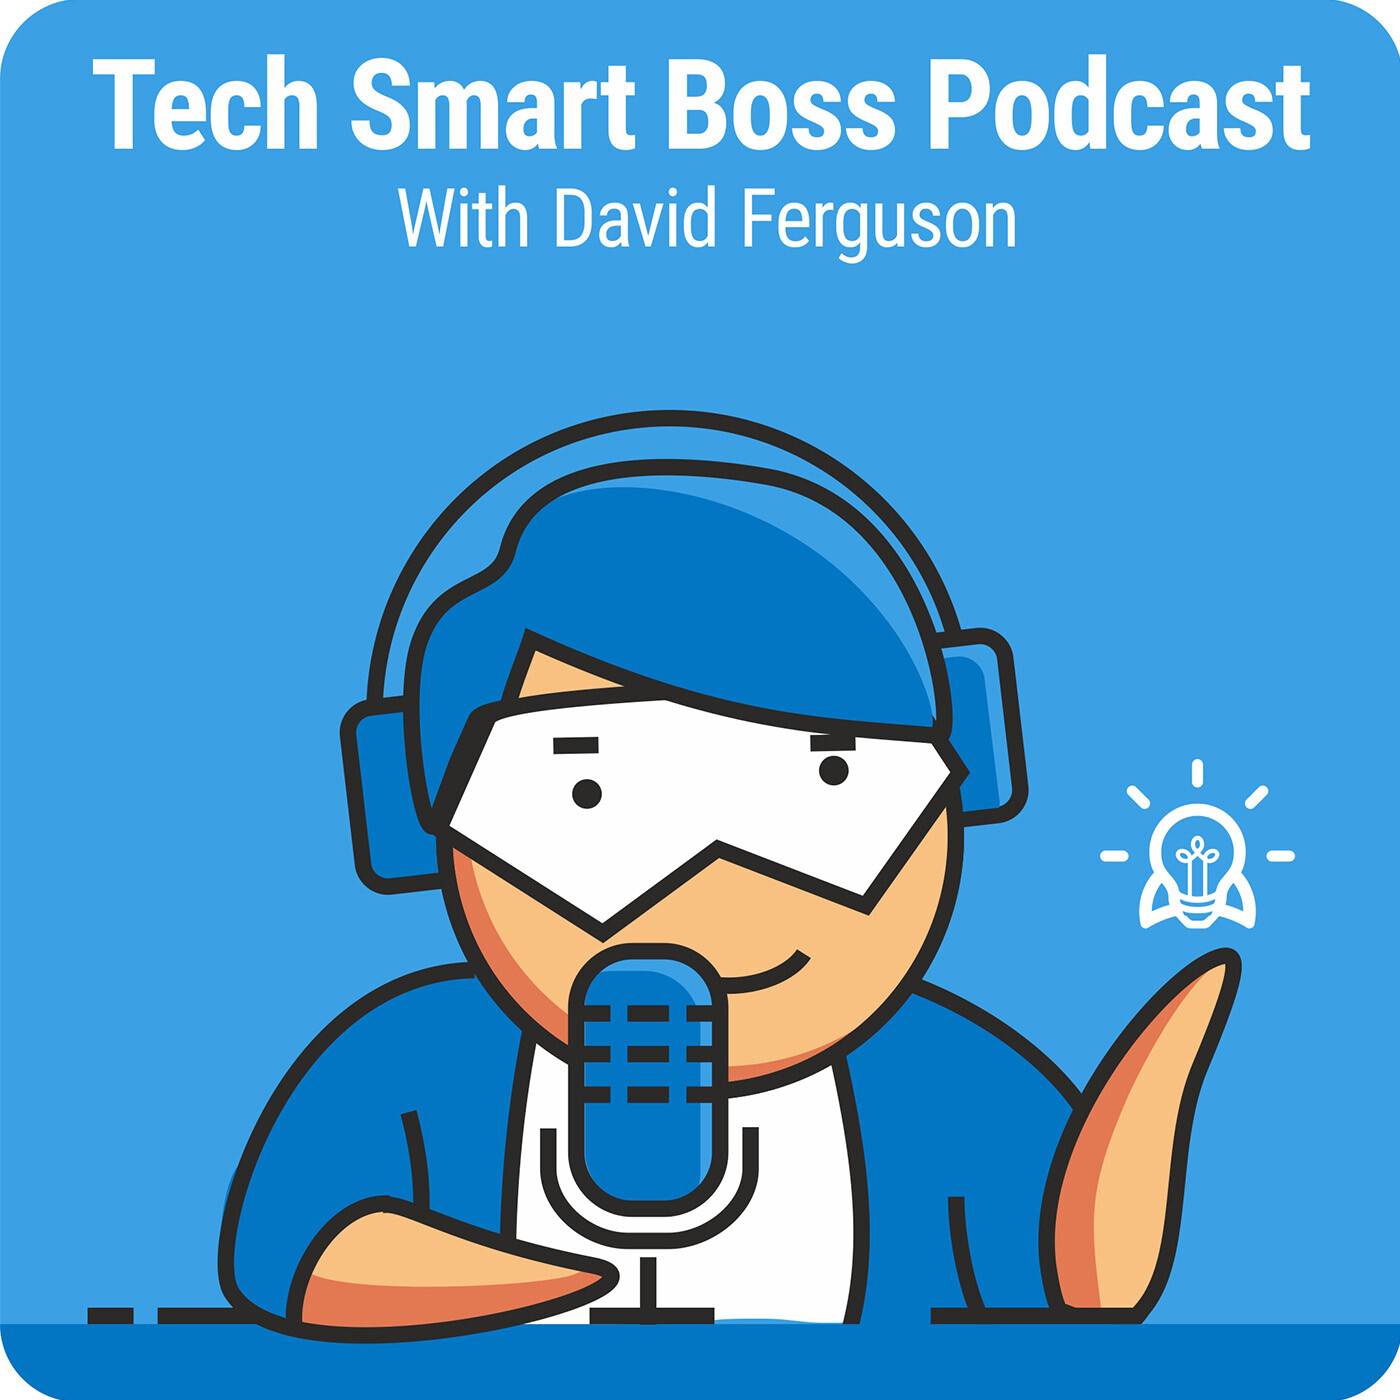 Episode 39: How to Get Started With Retargeting (The Tech Smart Boss Way)